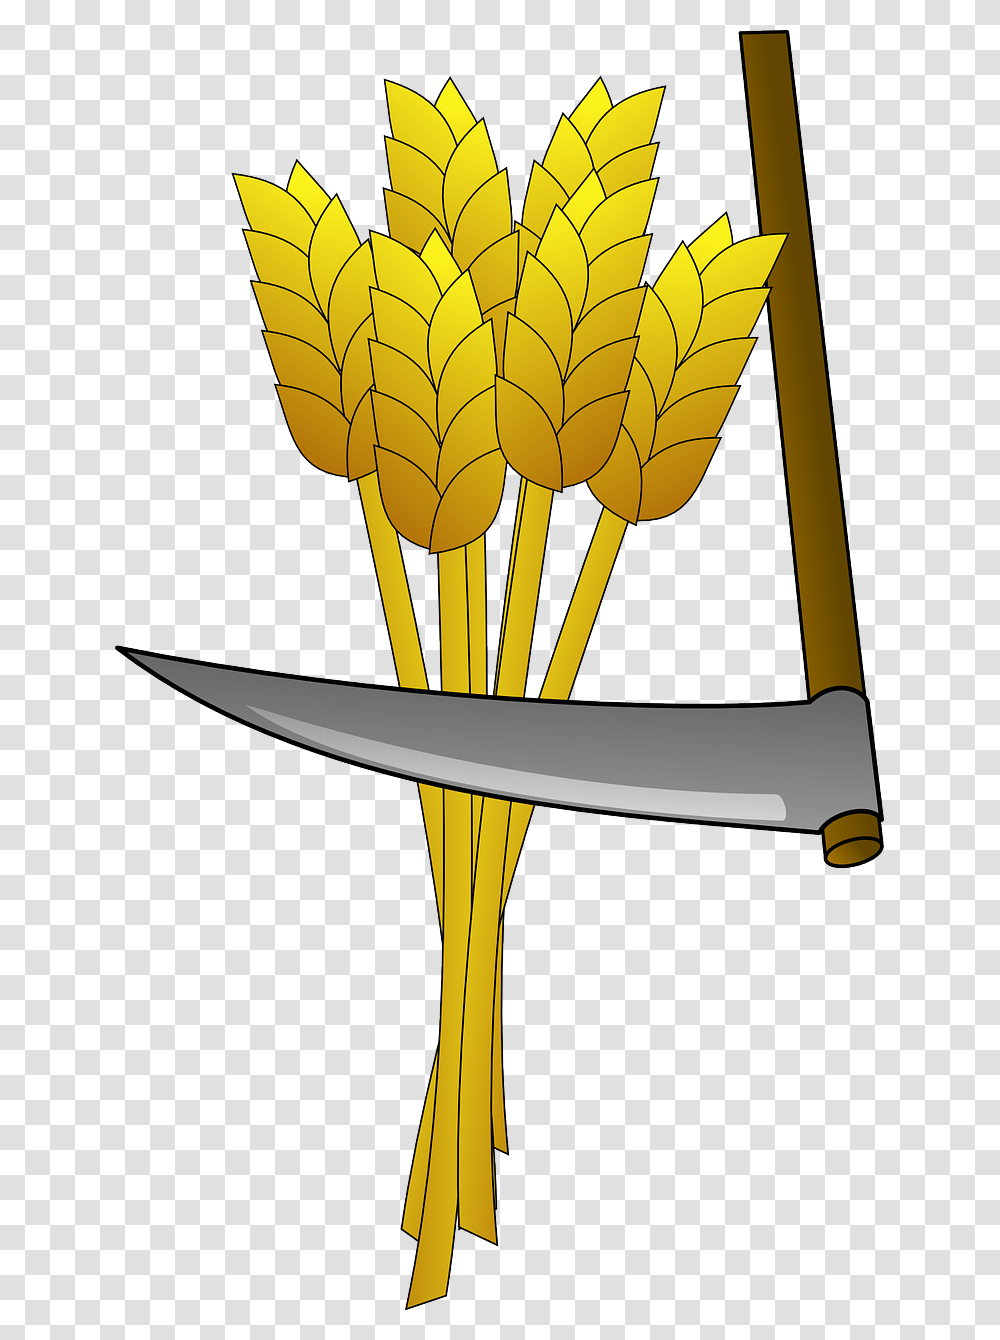 Scythe Harvest, Weapon, Weaponry, Blade, Handle Transparent Png